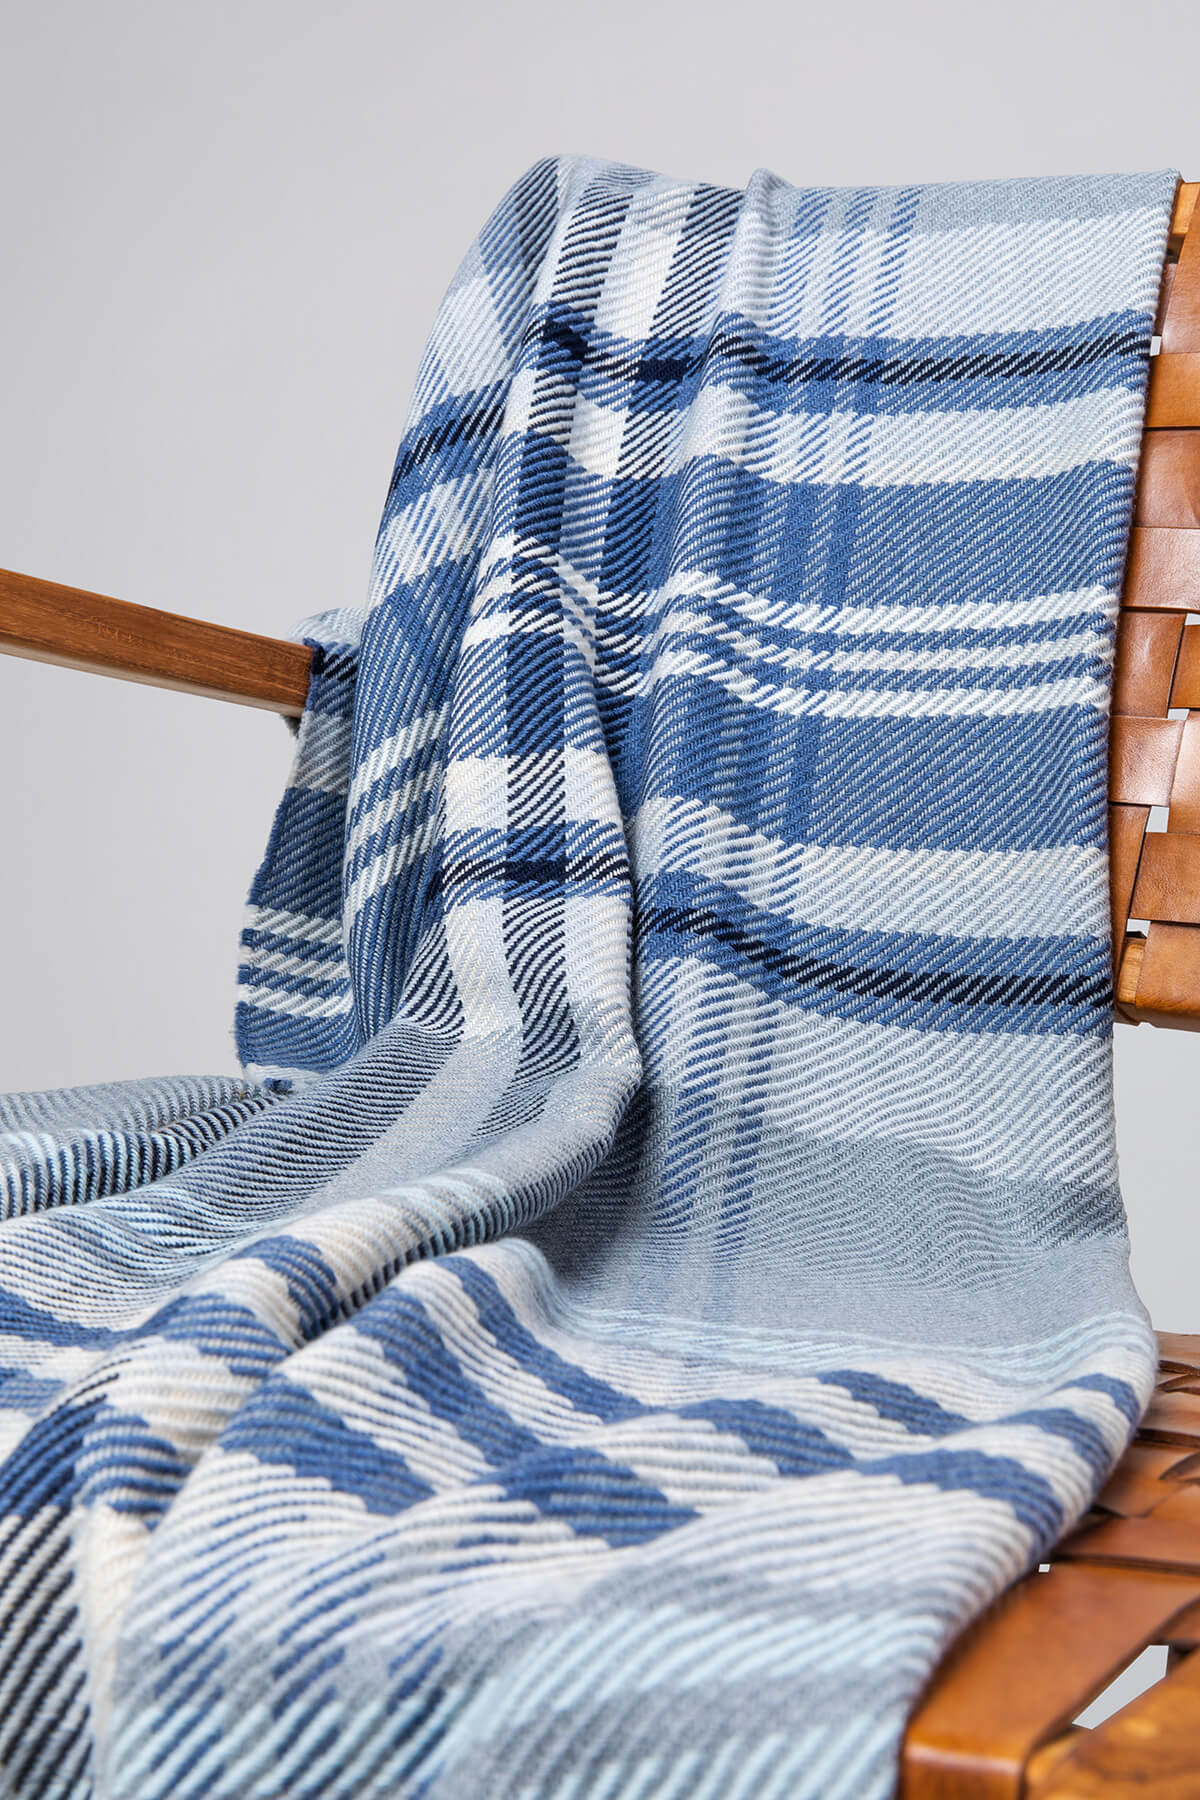 Johnstons of Elgin’s Blue & Grey Lofty Check Merino Throw on brown chair on a grey background WD001221RU6979ONE